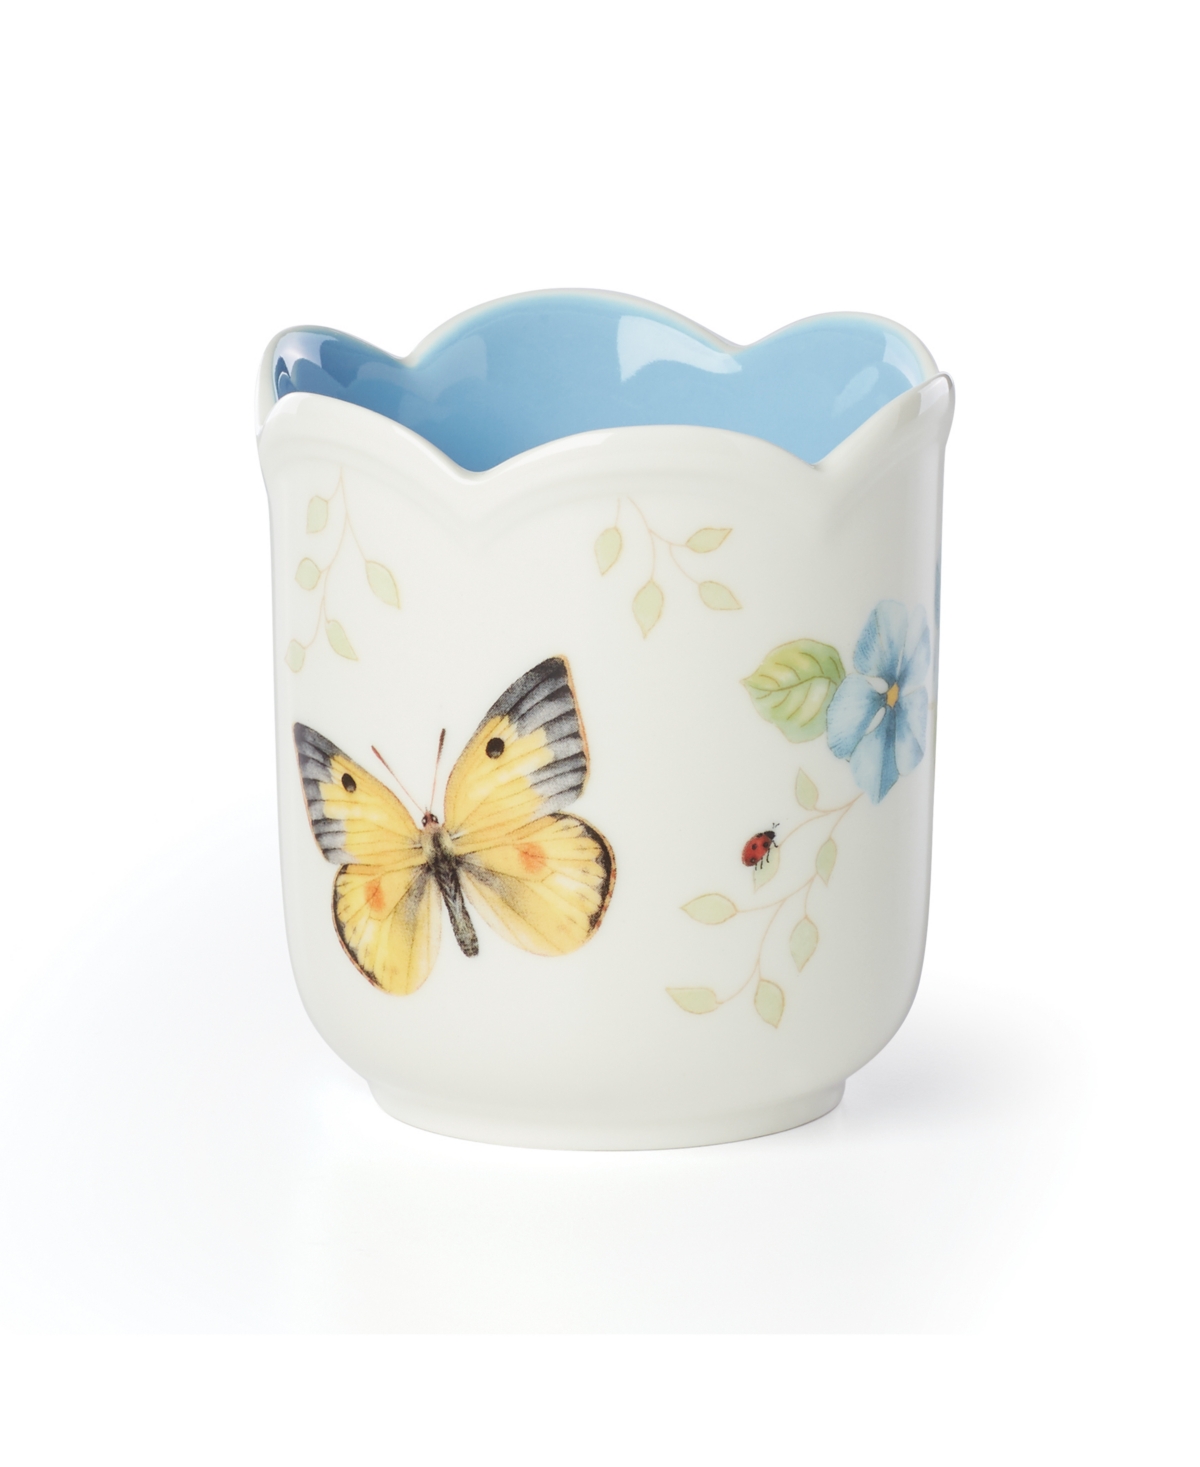 Lenox Butterfly Meadow Filled Candle, Blue Geranium